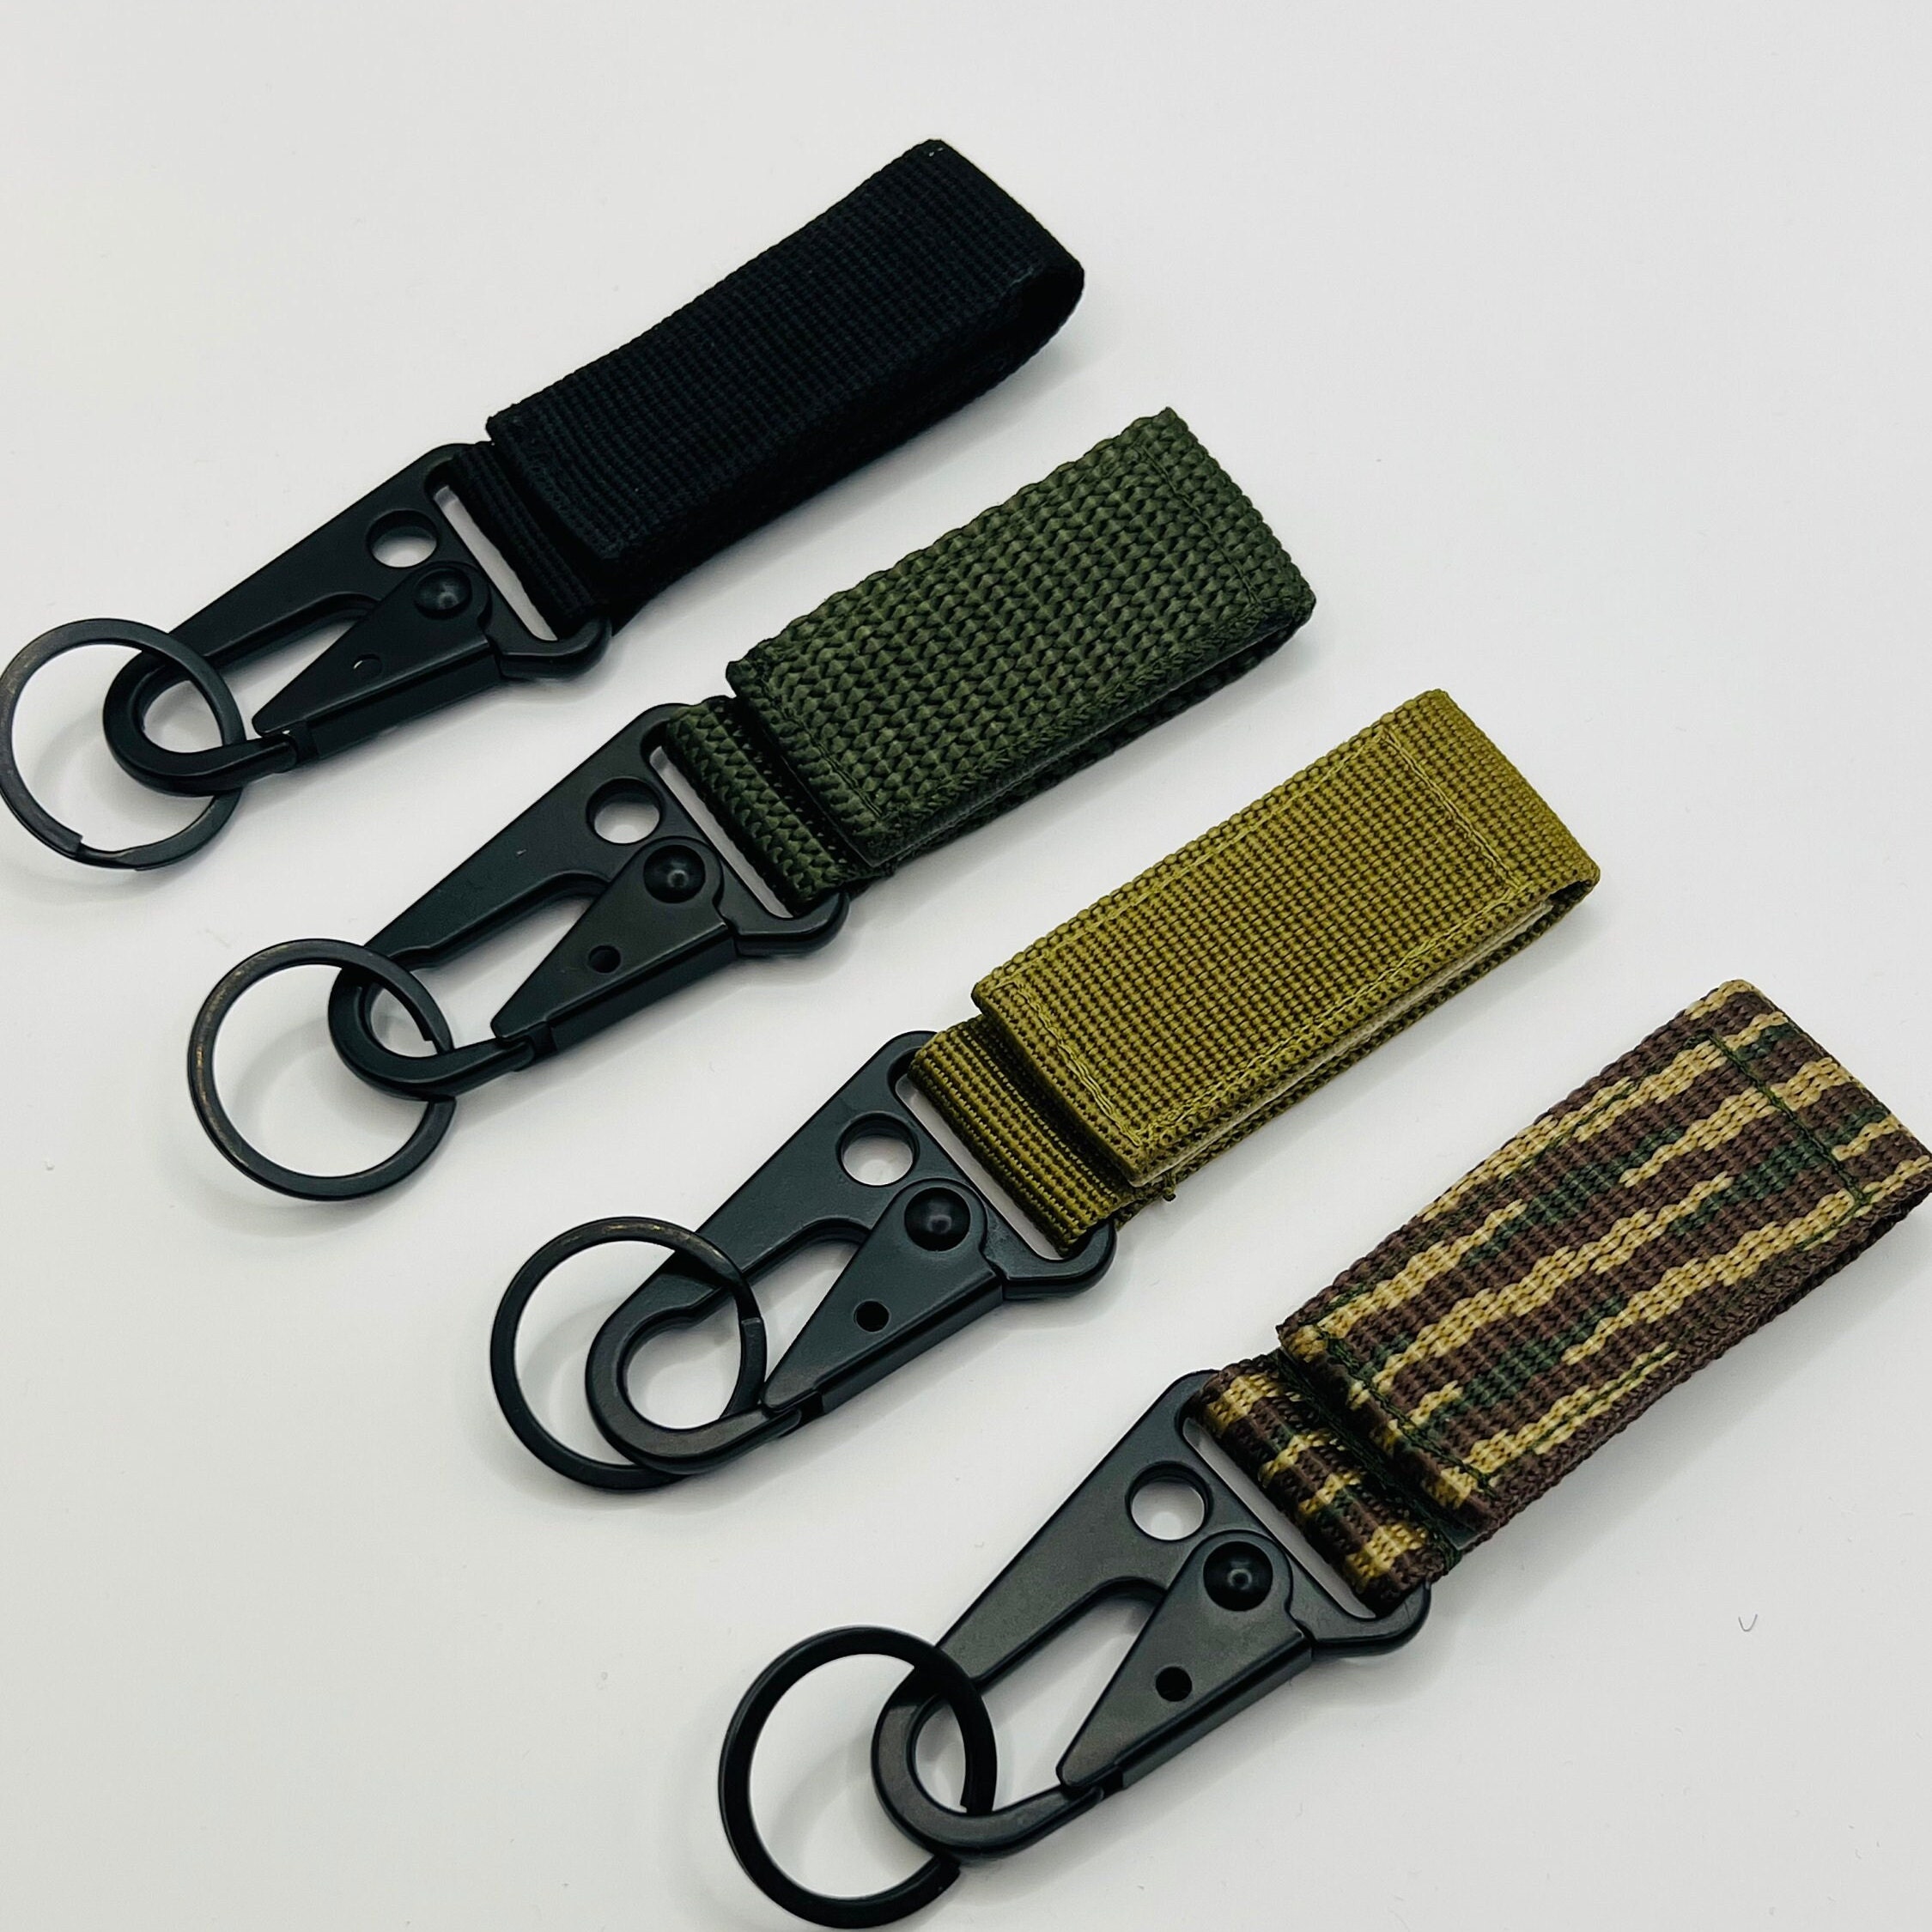 2 PACK] Nylon Velcro, Gear Keeper Pouch, Can Be Used As Key Chain, Key Ring  Holder, Outdoor Activities Hook, Quick-release Carabiner Buckle Standard  Tactical Belt Keychain Compatible with Molle Bags, Perfect Webbing